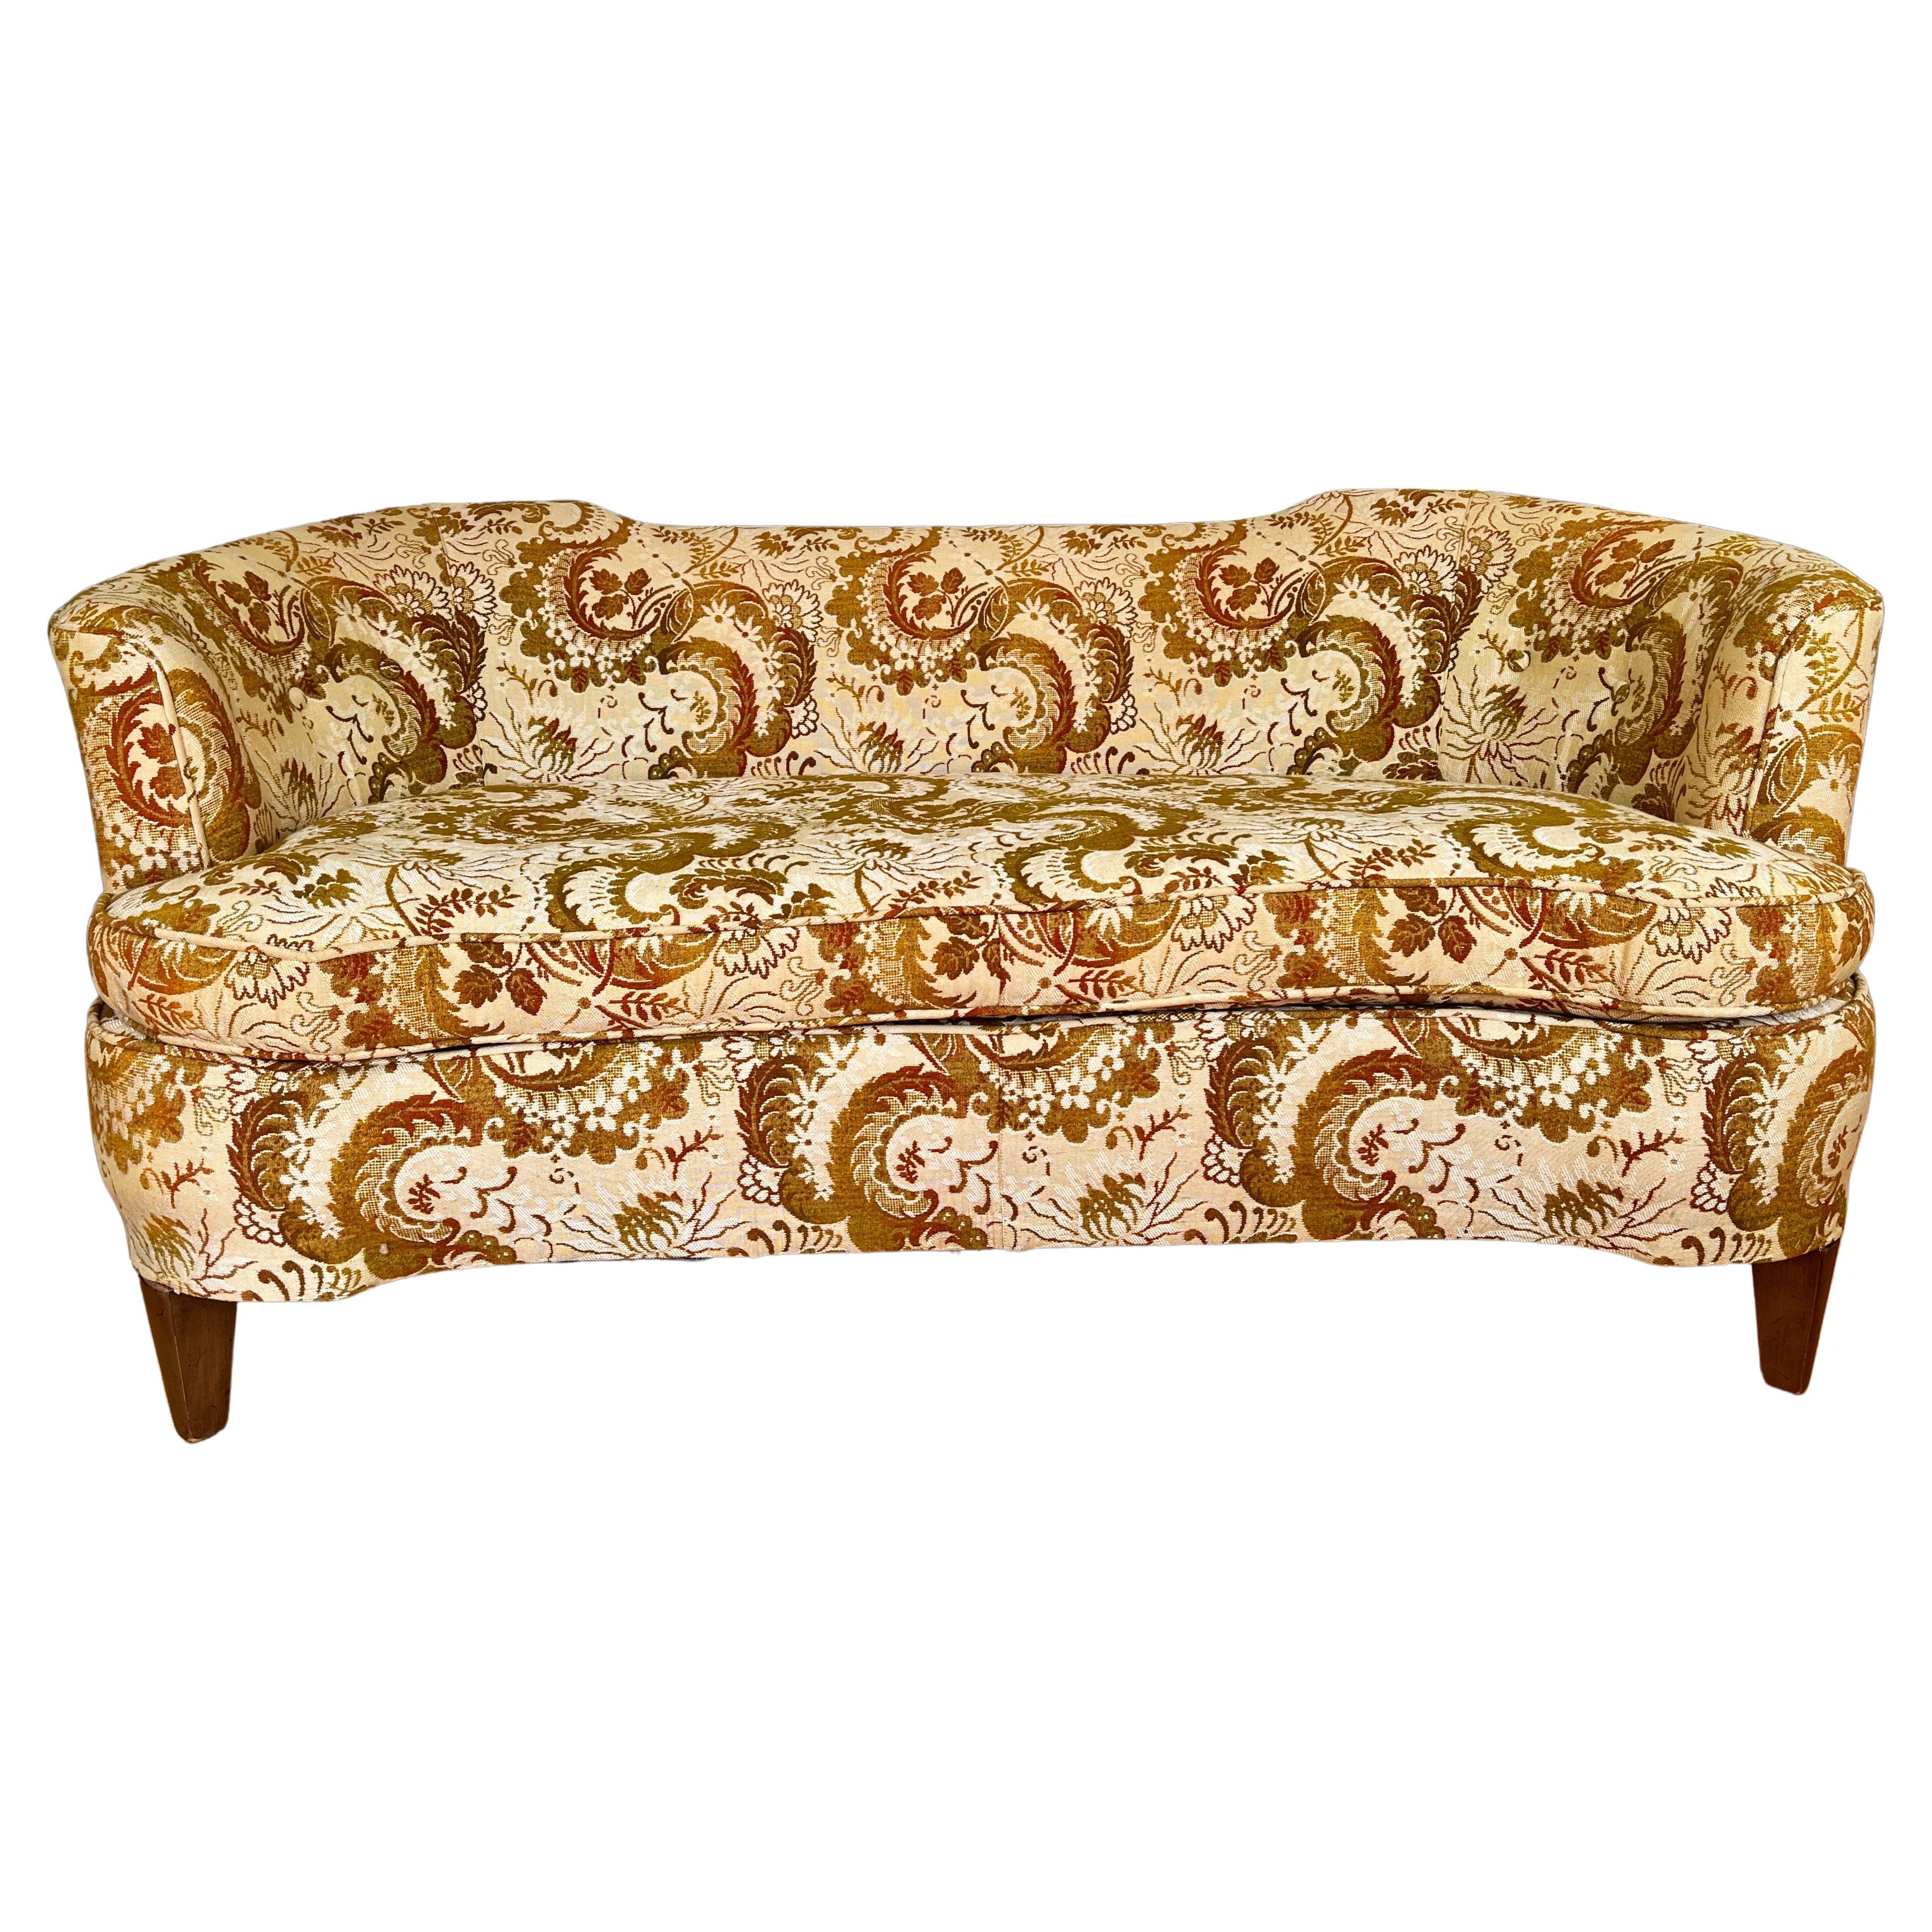 A small scale curved notched back modern style sofa with distinct design elements as seen in the Adelina sofa; Edward Wormley for Dunbar at Baker. Features : Floral Damask upholstery and single loose cushion. Of heirloom quality the sofa possesses